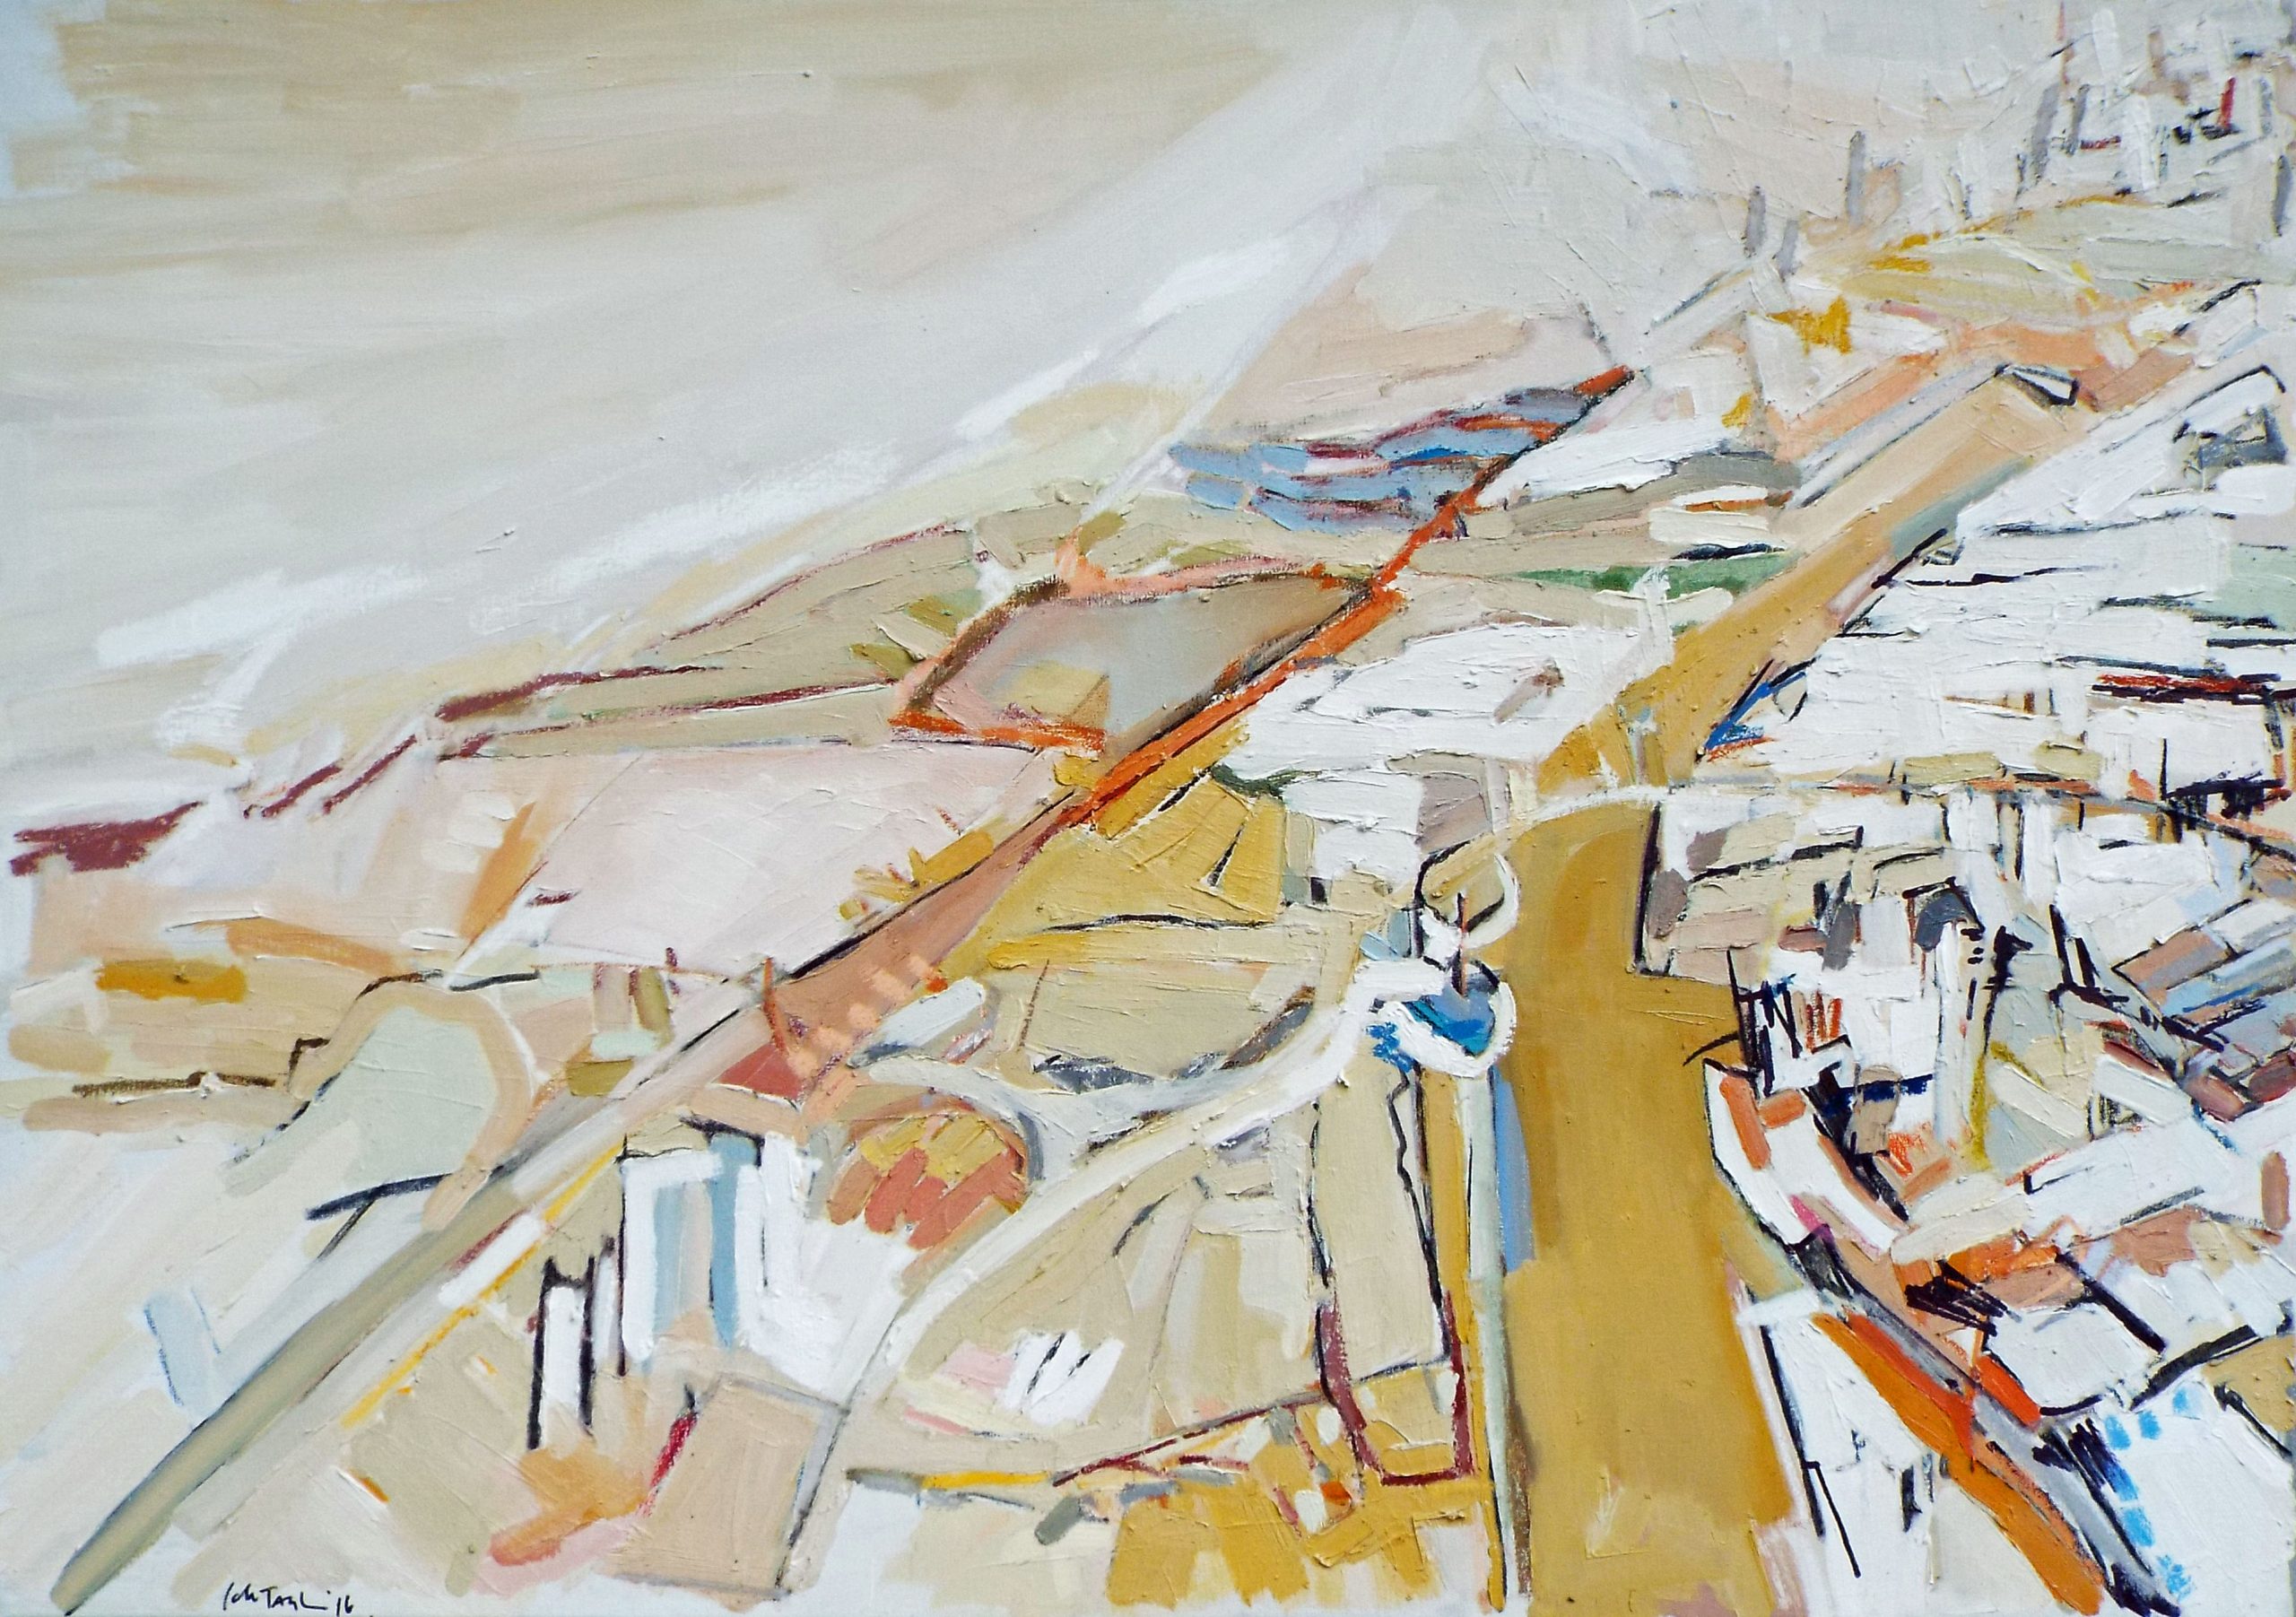 Colin Taylor - Manchester Ship Canal - oil, acrylic pen and ink on linen, size: 71x99cm £2,400